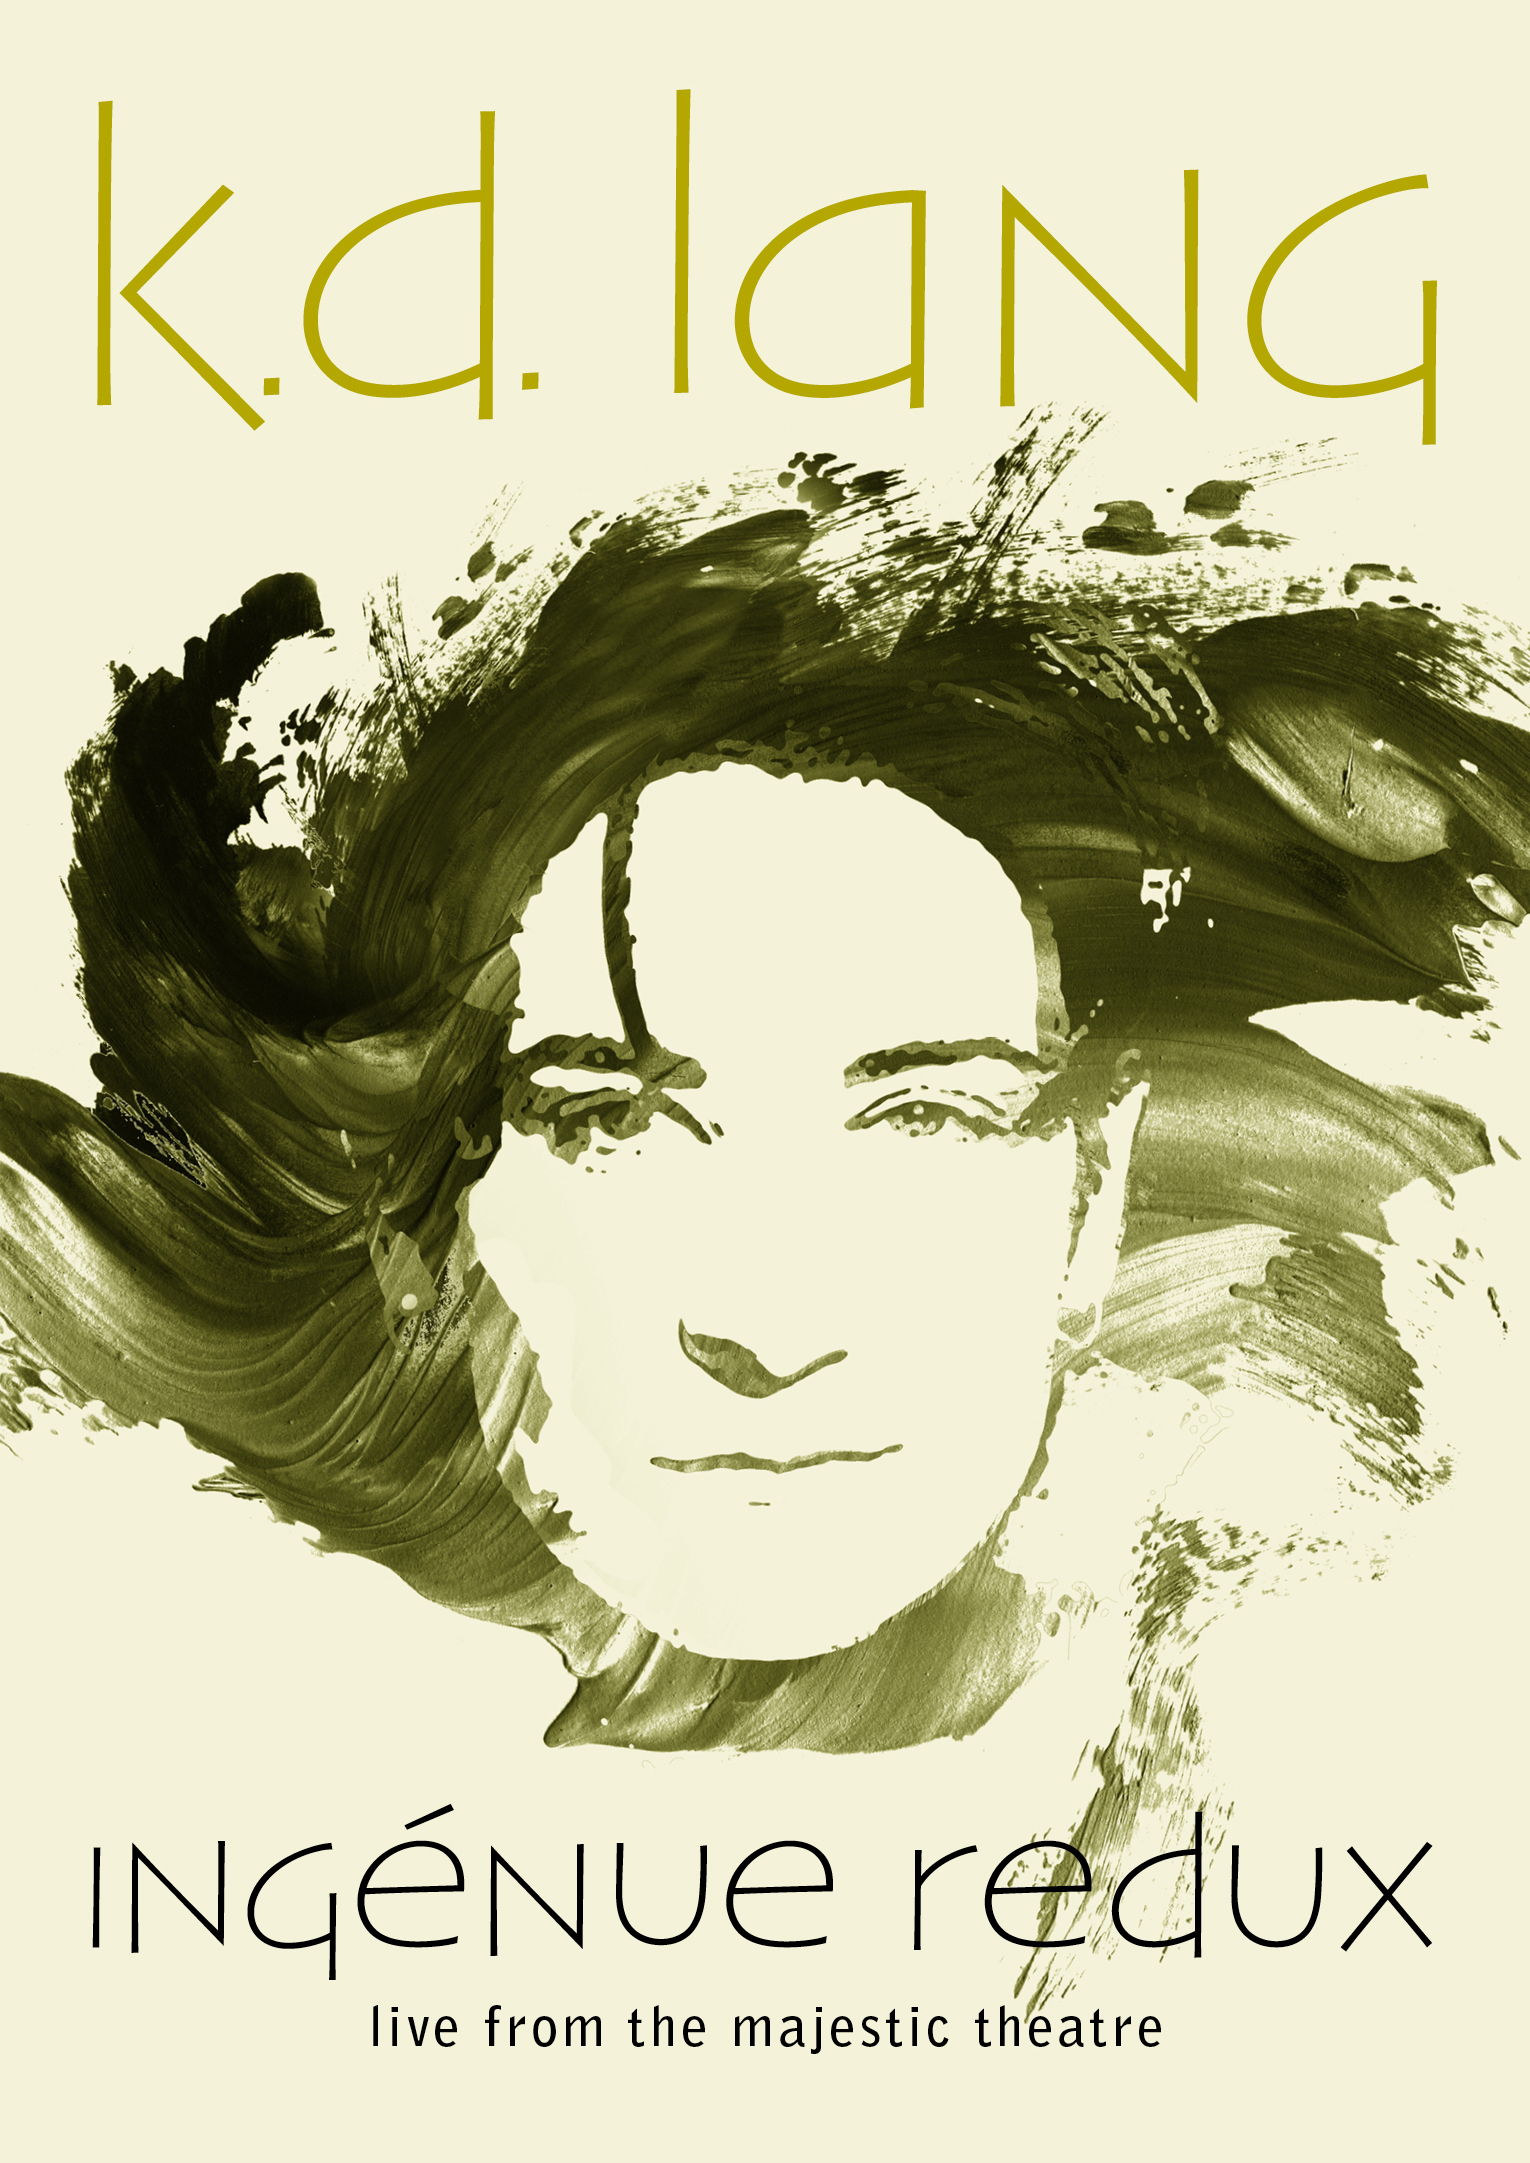 INGENUE REDUX: LIVE FROM THE MAJESTIC THEATRE-K.D. LANG